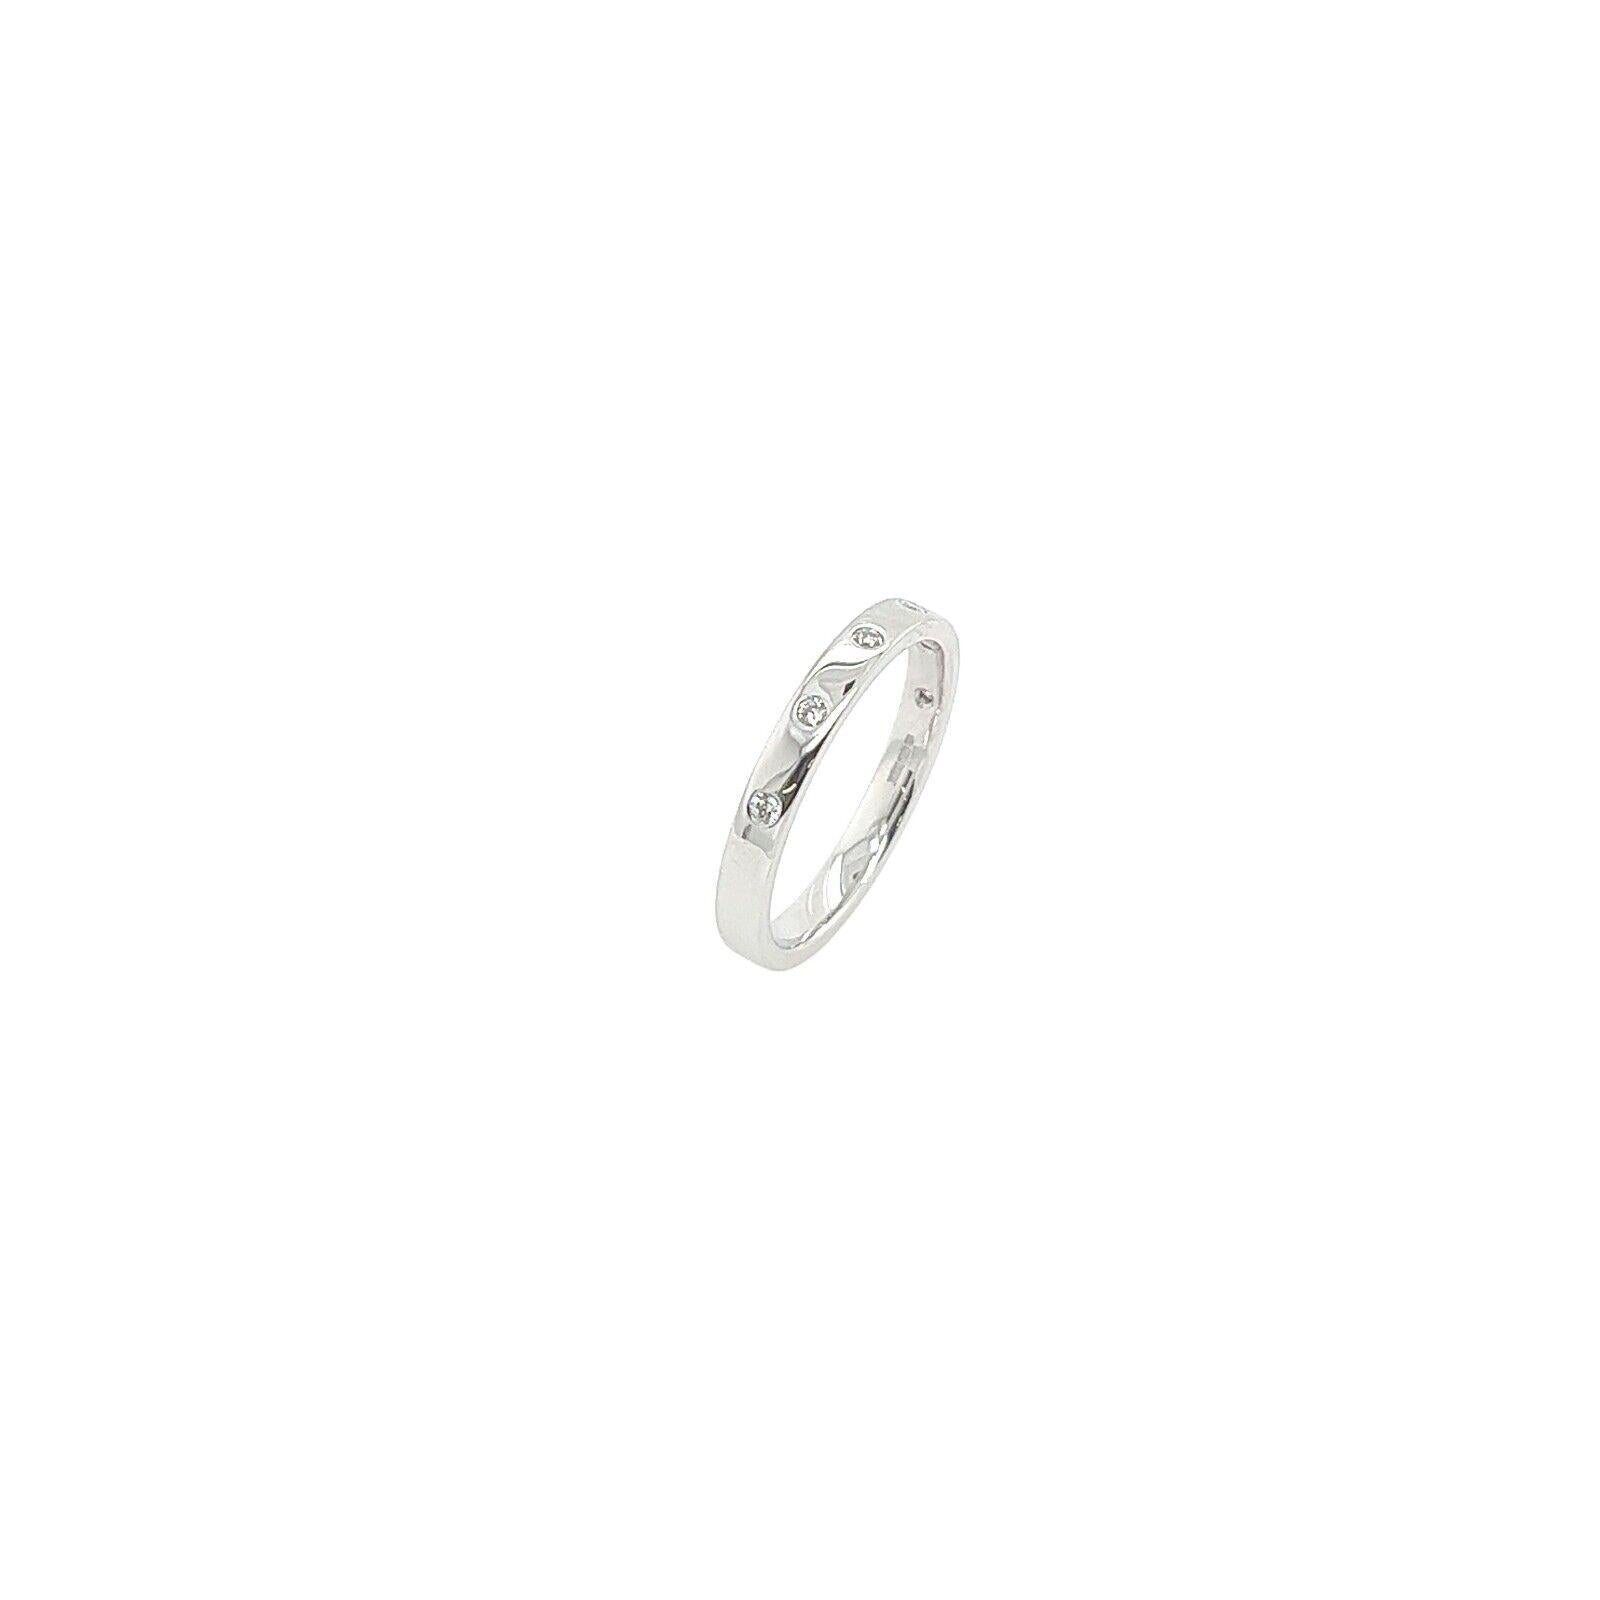 This 18ct White Gold Diamond wedding band is set with 6 round brilliant cut Diamonds. This ring is elegant and beautiful for wedding.

Additional Information:
Total Diamond Weight: 0.06ct 
Diamond Colour: G
Diamond Clarity: VS1
Width of Band: 2.50mm